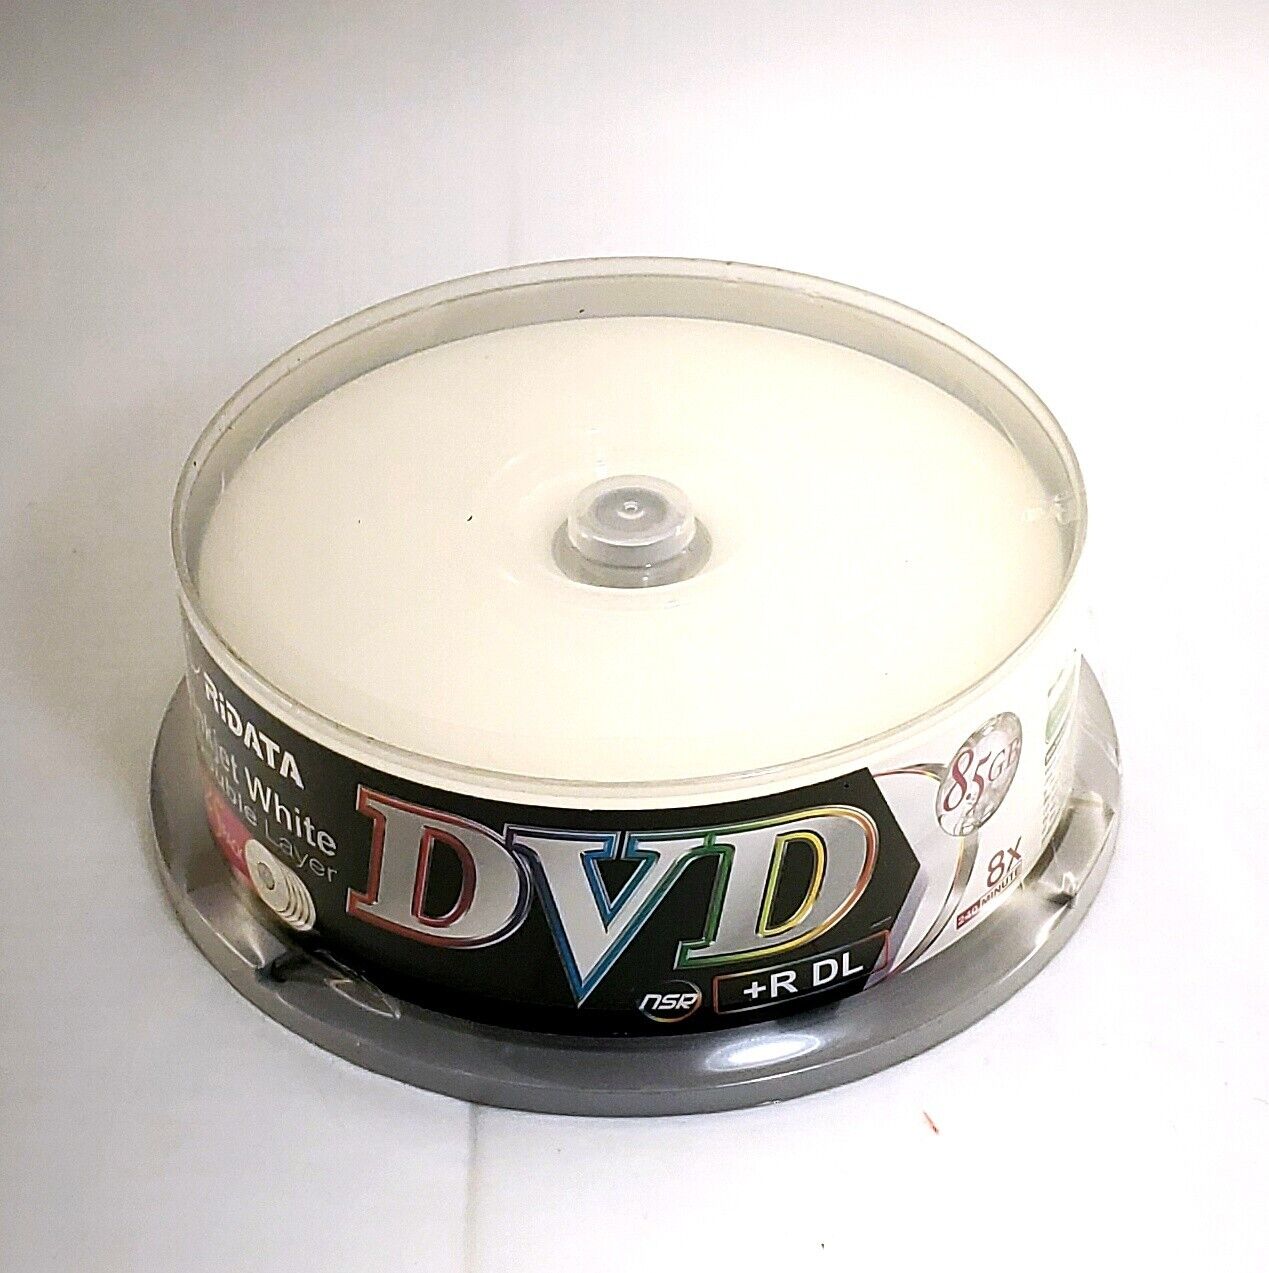 DVD+R DL INKJET White Printable Dual Double Layer Disc 8.5GB Ridata 25-Pack Spin